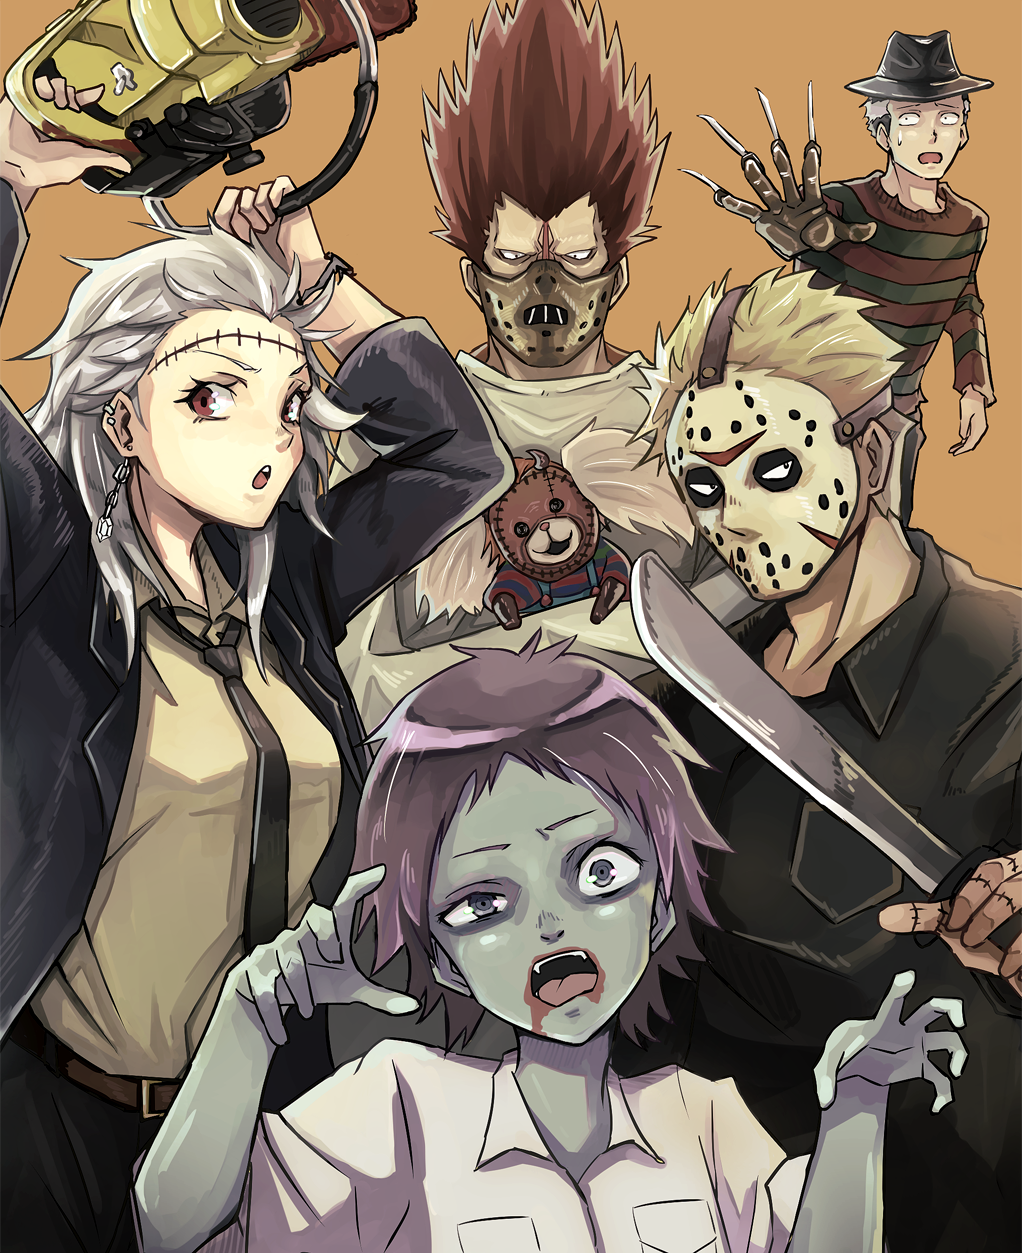 2girls 3boys a_nightmare_on_elm_street animal belt black_shirt blonde_hair blood blood_on_face chainsaw child's_play chucky chucky_(cosplay) collared_shirt cosplay dorohedoro ear_piercing earrings ebisu_(dorohedoro) en_(dorohedoro) fedora freddy_krueger freddy_krueger_(cosplay) friday_the_13th fujita_(dorohedoro) hannibal_lecter hannibal_lecter_(cosplay) hat highres hockey_mask holding holding_animal holding_chainsaw holding_weapon jason_voorhees jason_voorhees_(cosplay) jewelry kikurage_(dorohedoro) leatherface leatherface_(cosplay) machete mask multicolored_hair multiple_boys multiple_girls necktie noi_(dorohedoro) open_mouth orange_background osakanaotoko overalls piercing purple_hair red_eyes redhead shin_(dorohedoro) shirt simple_background straitjacket the_silence_of_the_lambs the_texas_chainsaw_massacre two-tone_hair weapon white_shirt